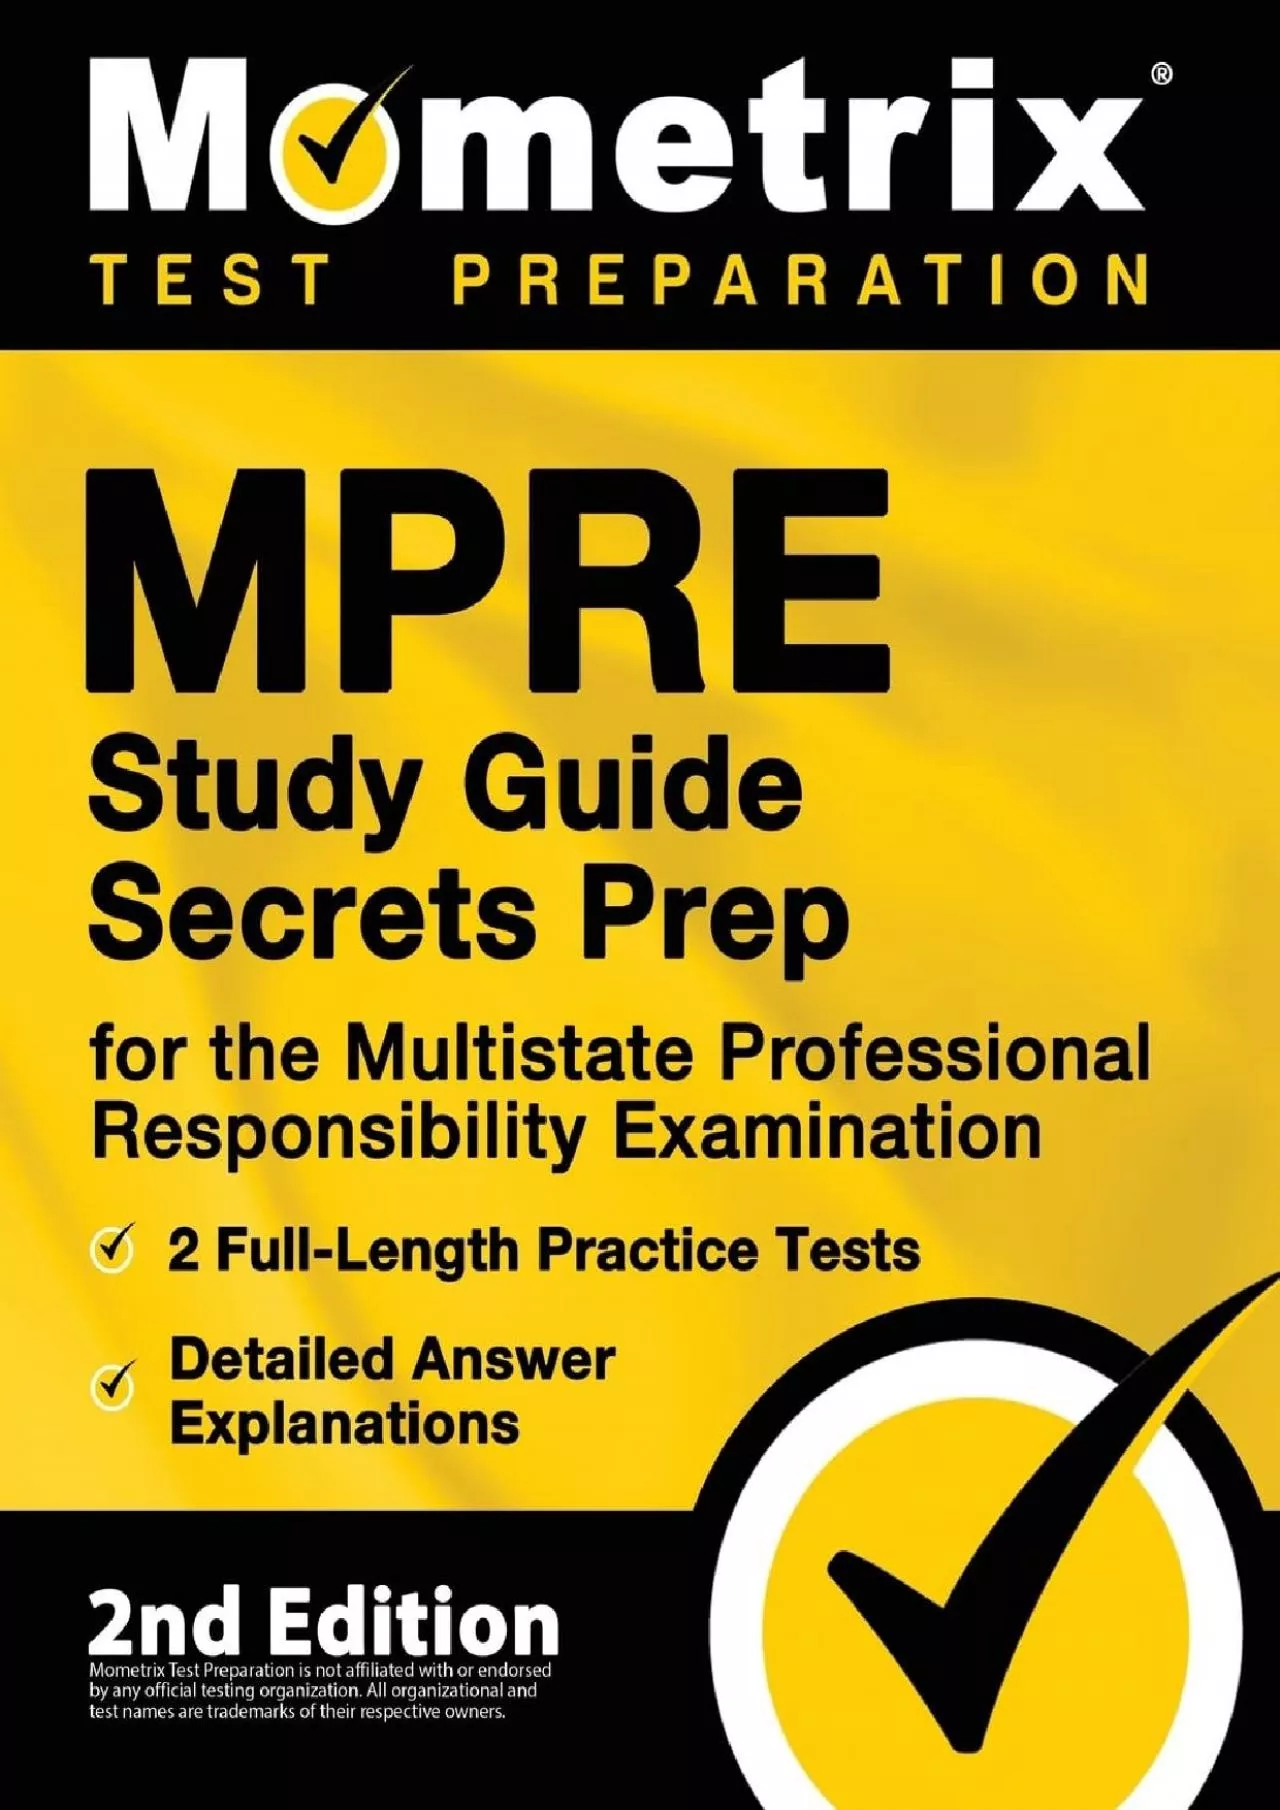 [EBOOK] MPRE Study Guide Secrets Prep for the Multistate Professional Responsibility Examination,